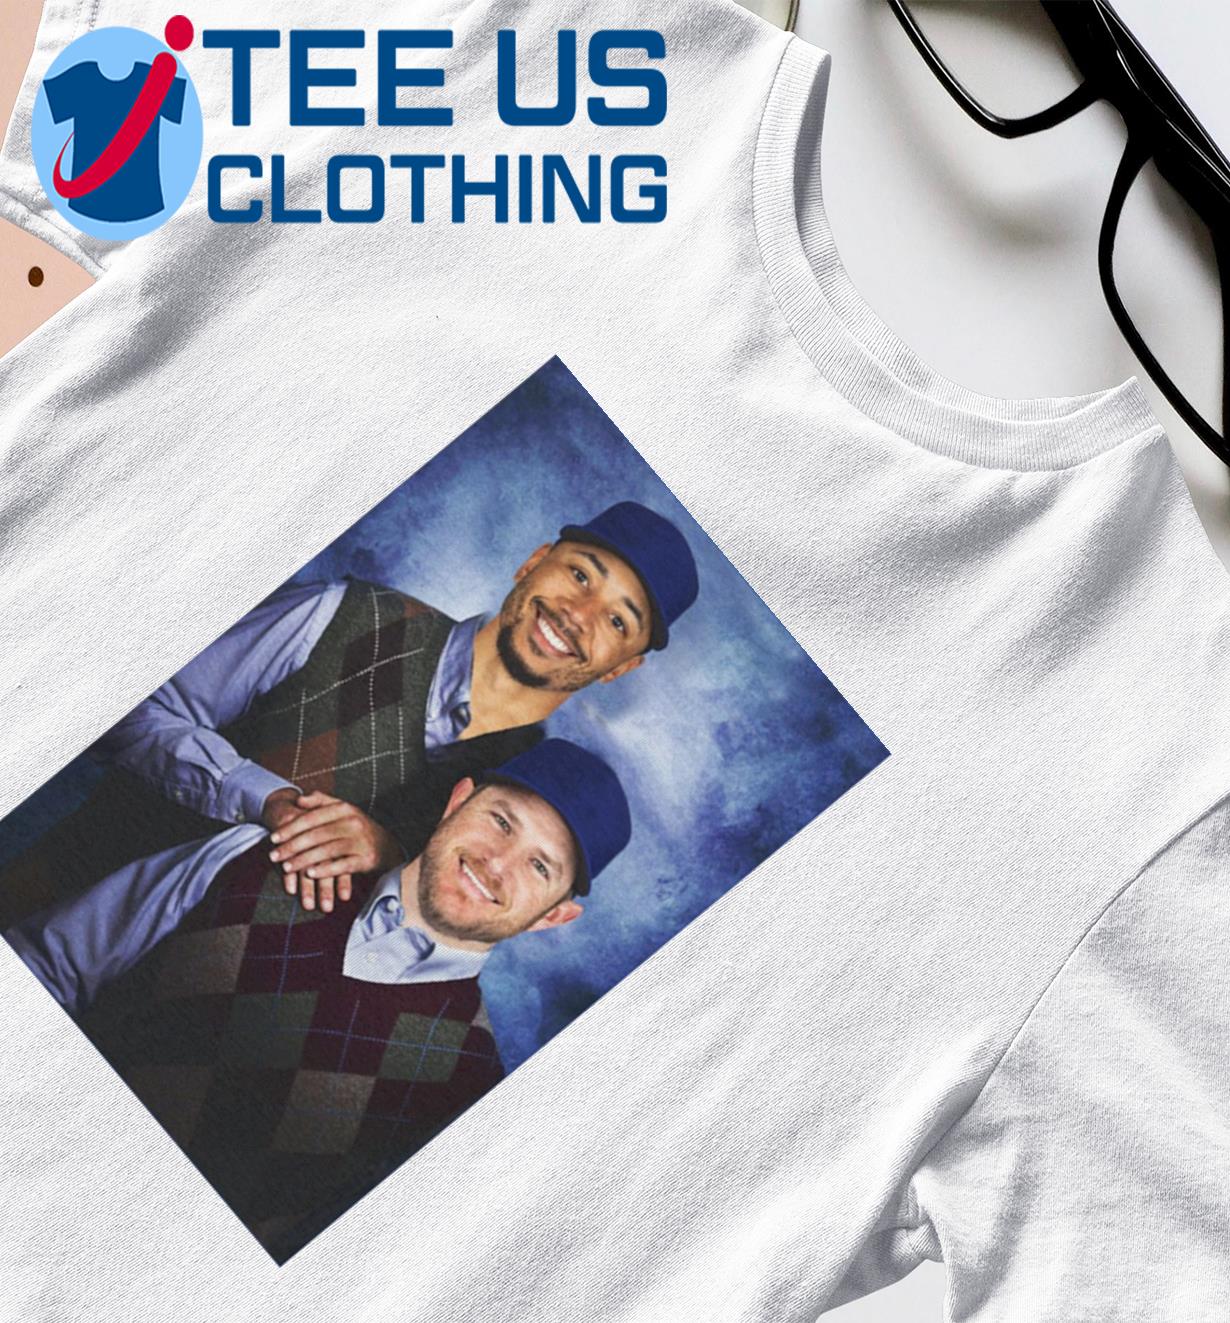 mookie betts clothing